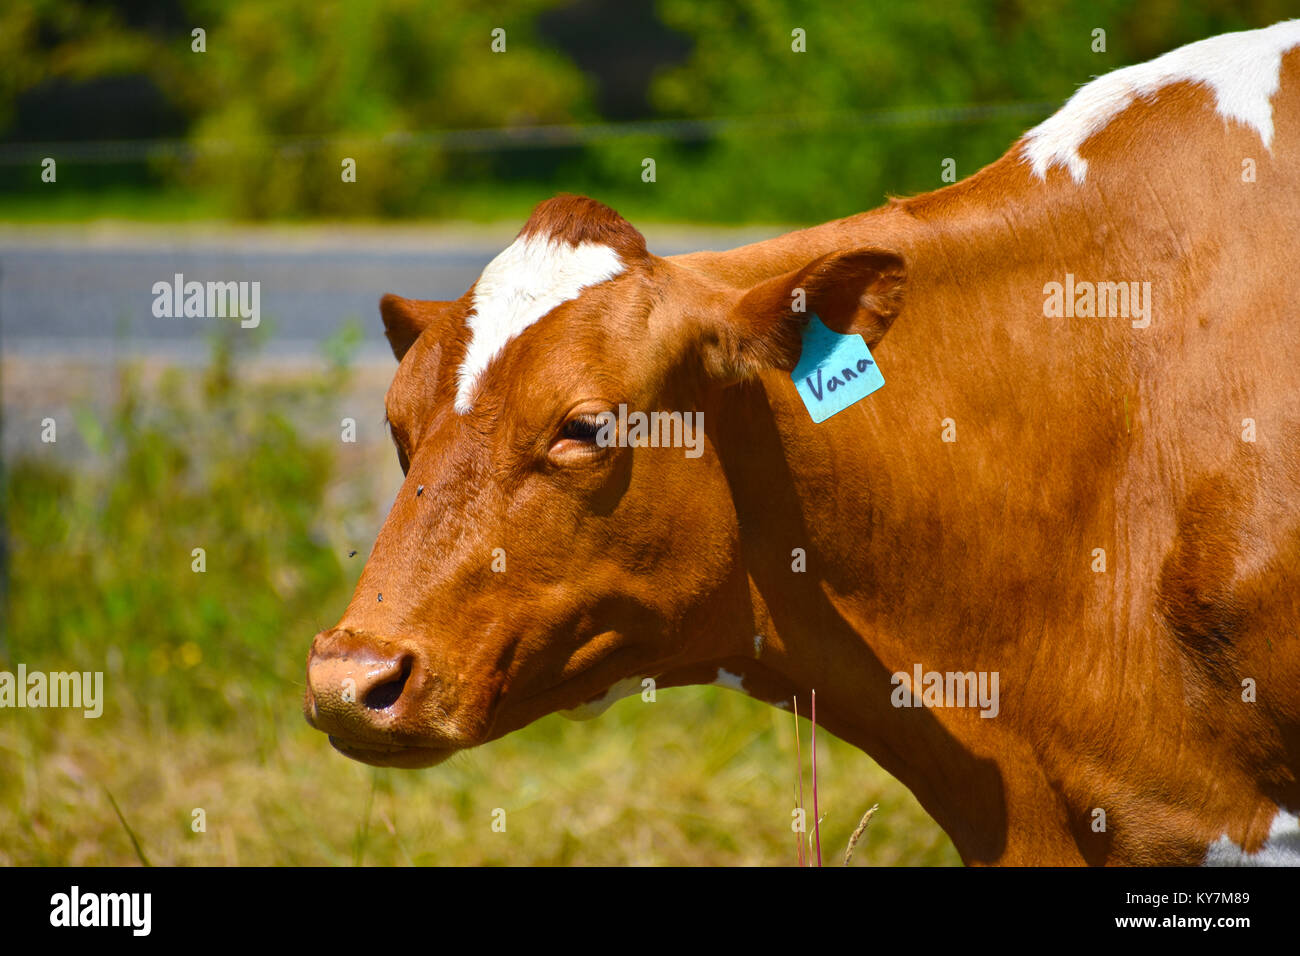 A cow namded Vana in the pacific northwest summer.  A few flies are around her nose.  An out of focus road is in the background. Stock Photo